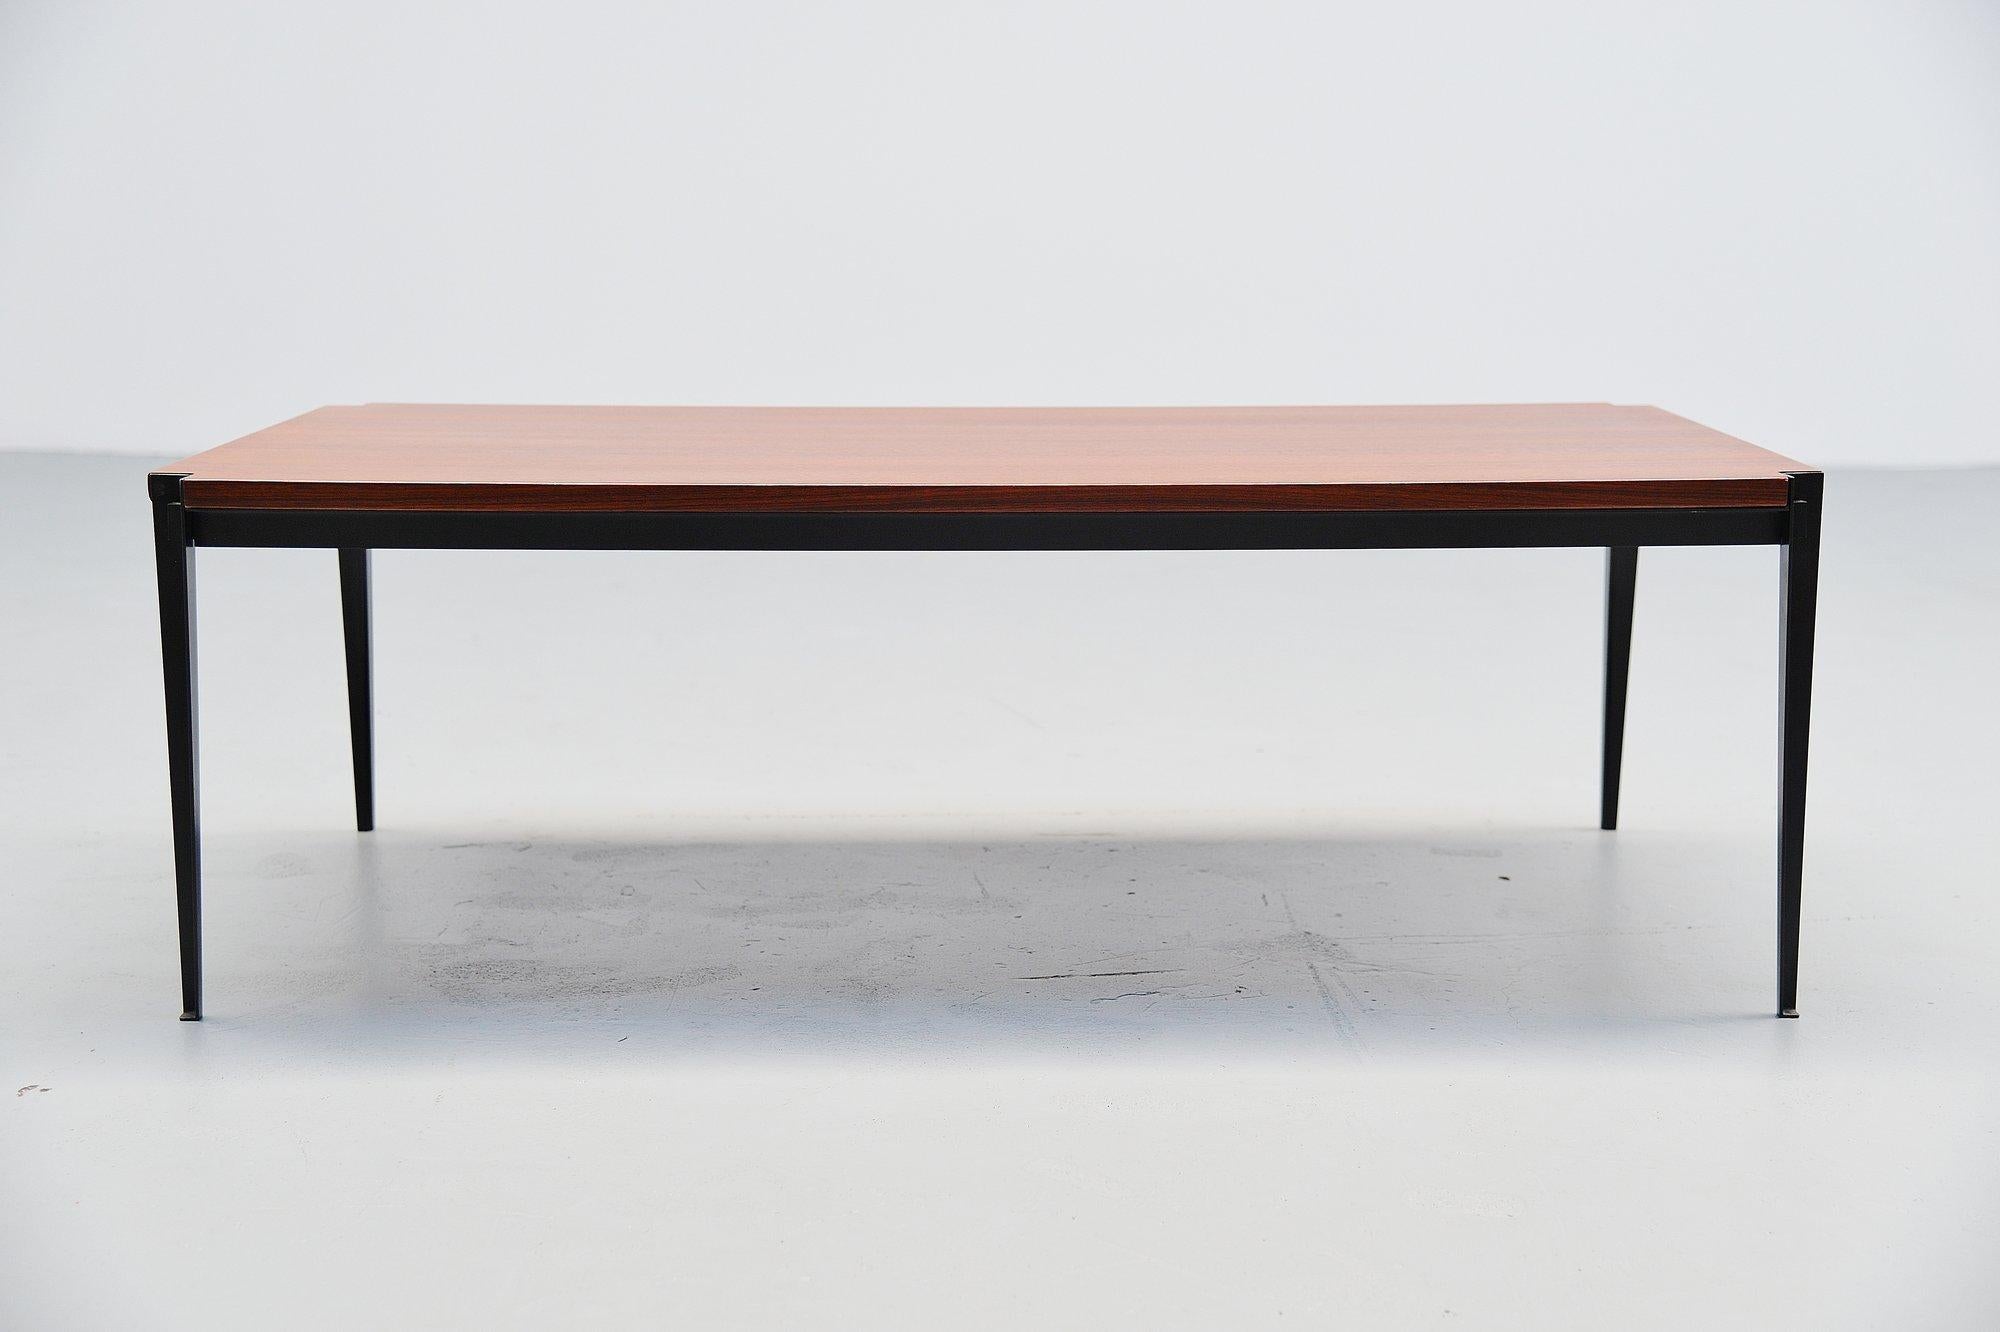 Minimalistic cofee table model T61B designed by Osvaldo Borsani and manufactured by Tecno, Italy 1957. This table has black painted metal frame and a rosewood top. The simplicity of form deriving from the clarity of the structural system makes this